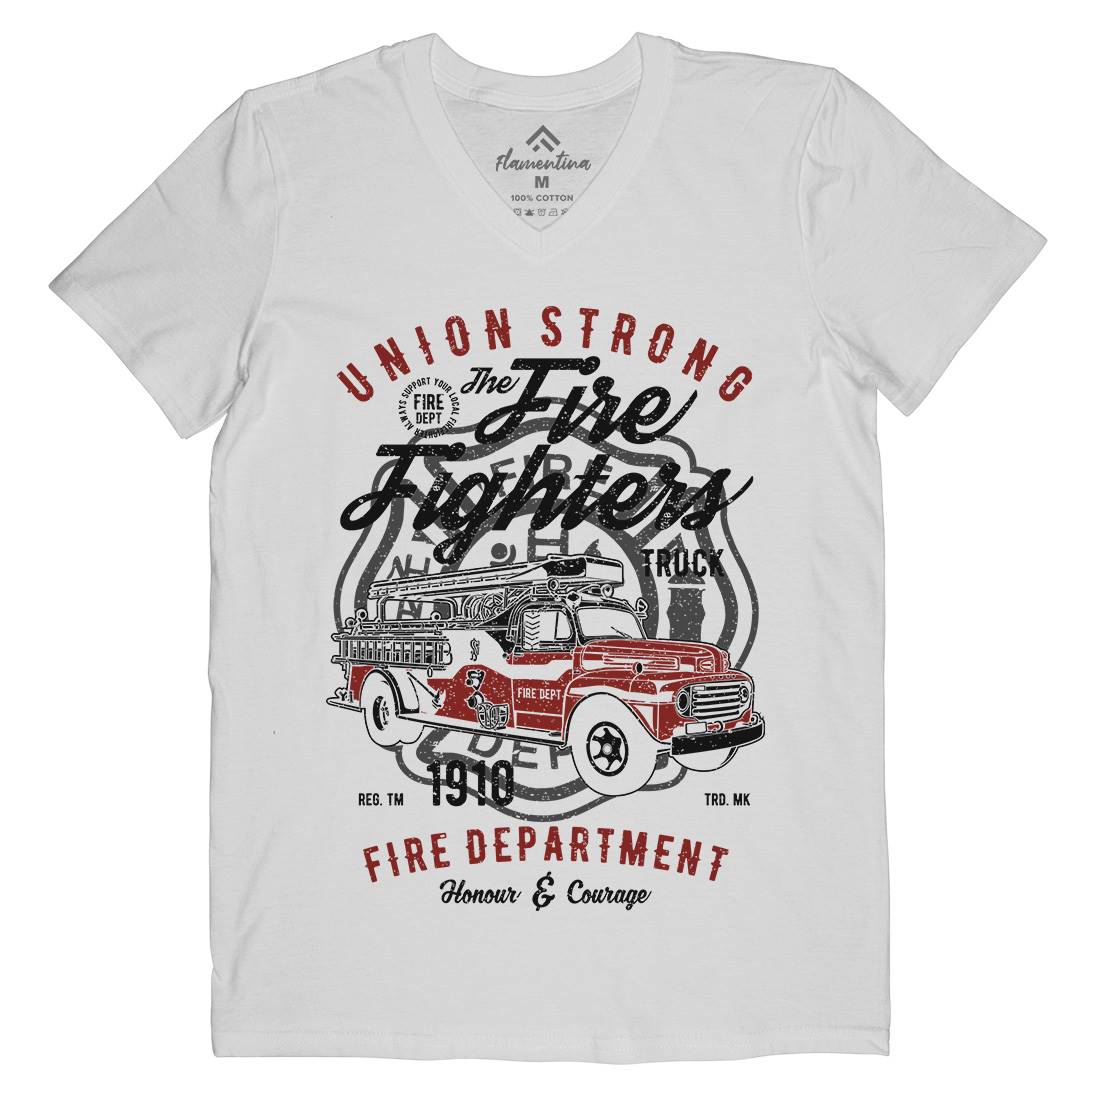 Union Strong Mens Organic V-Neck T-Shirt Firefighters A781